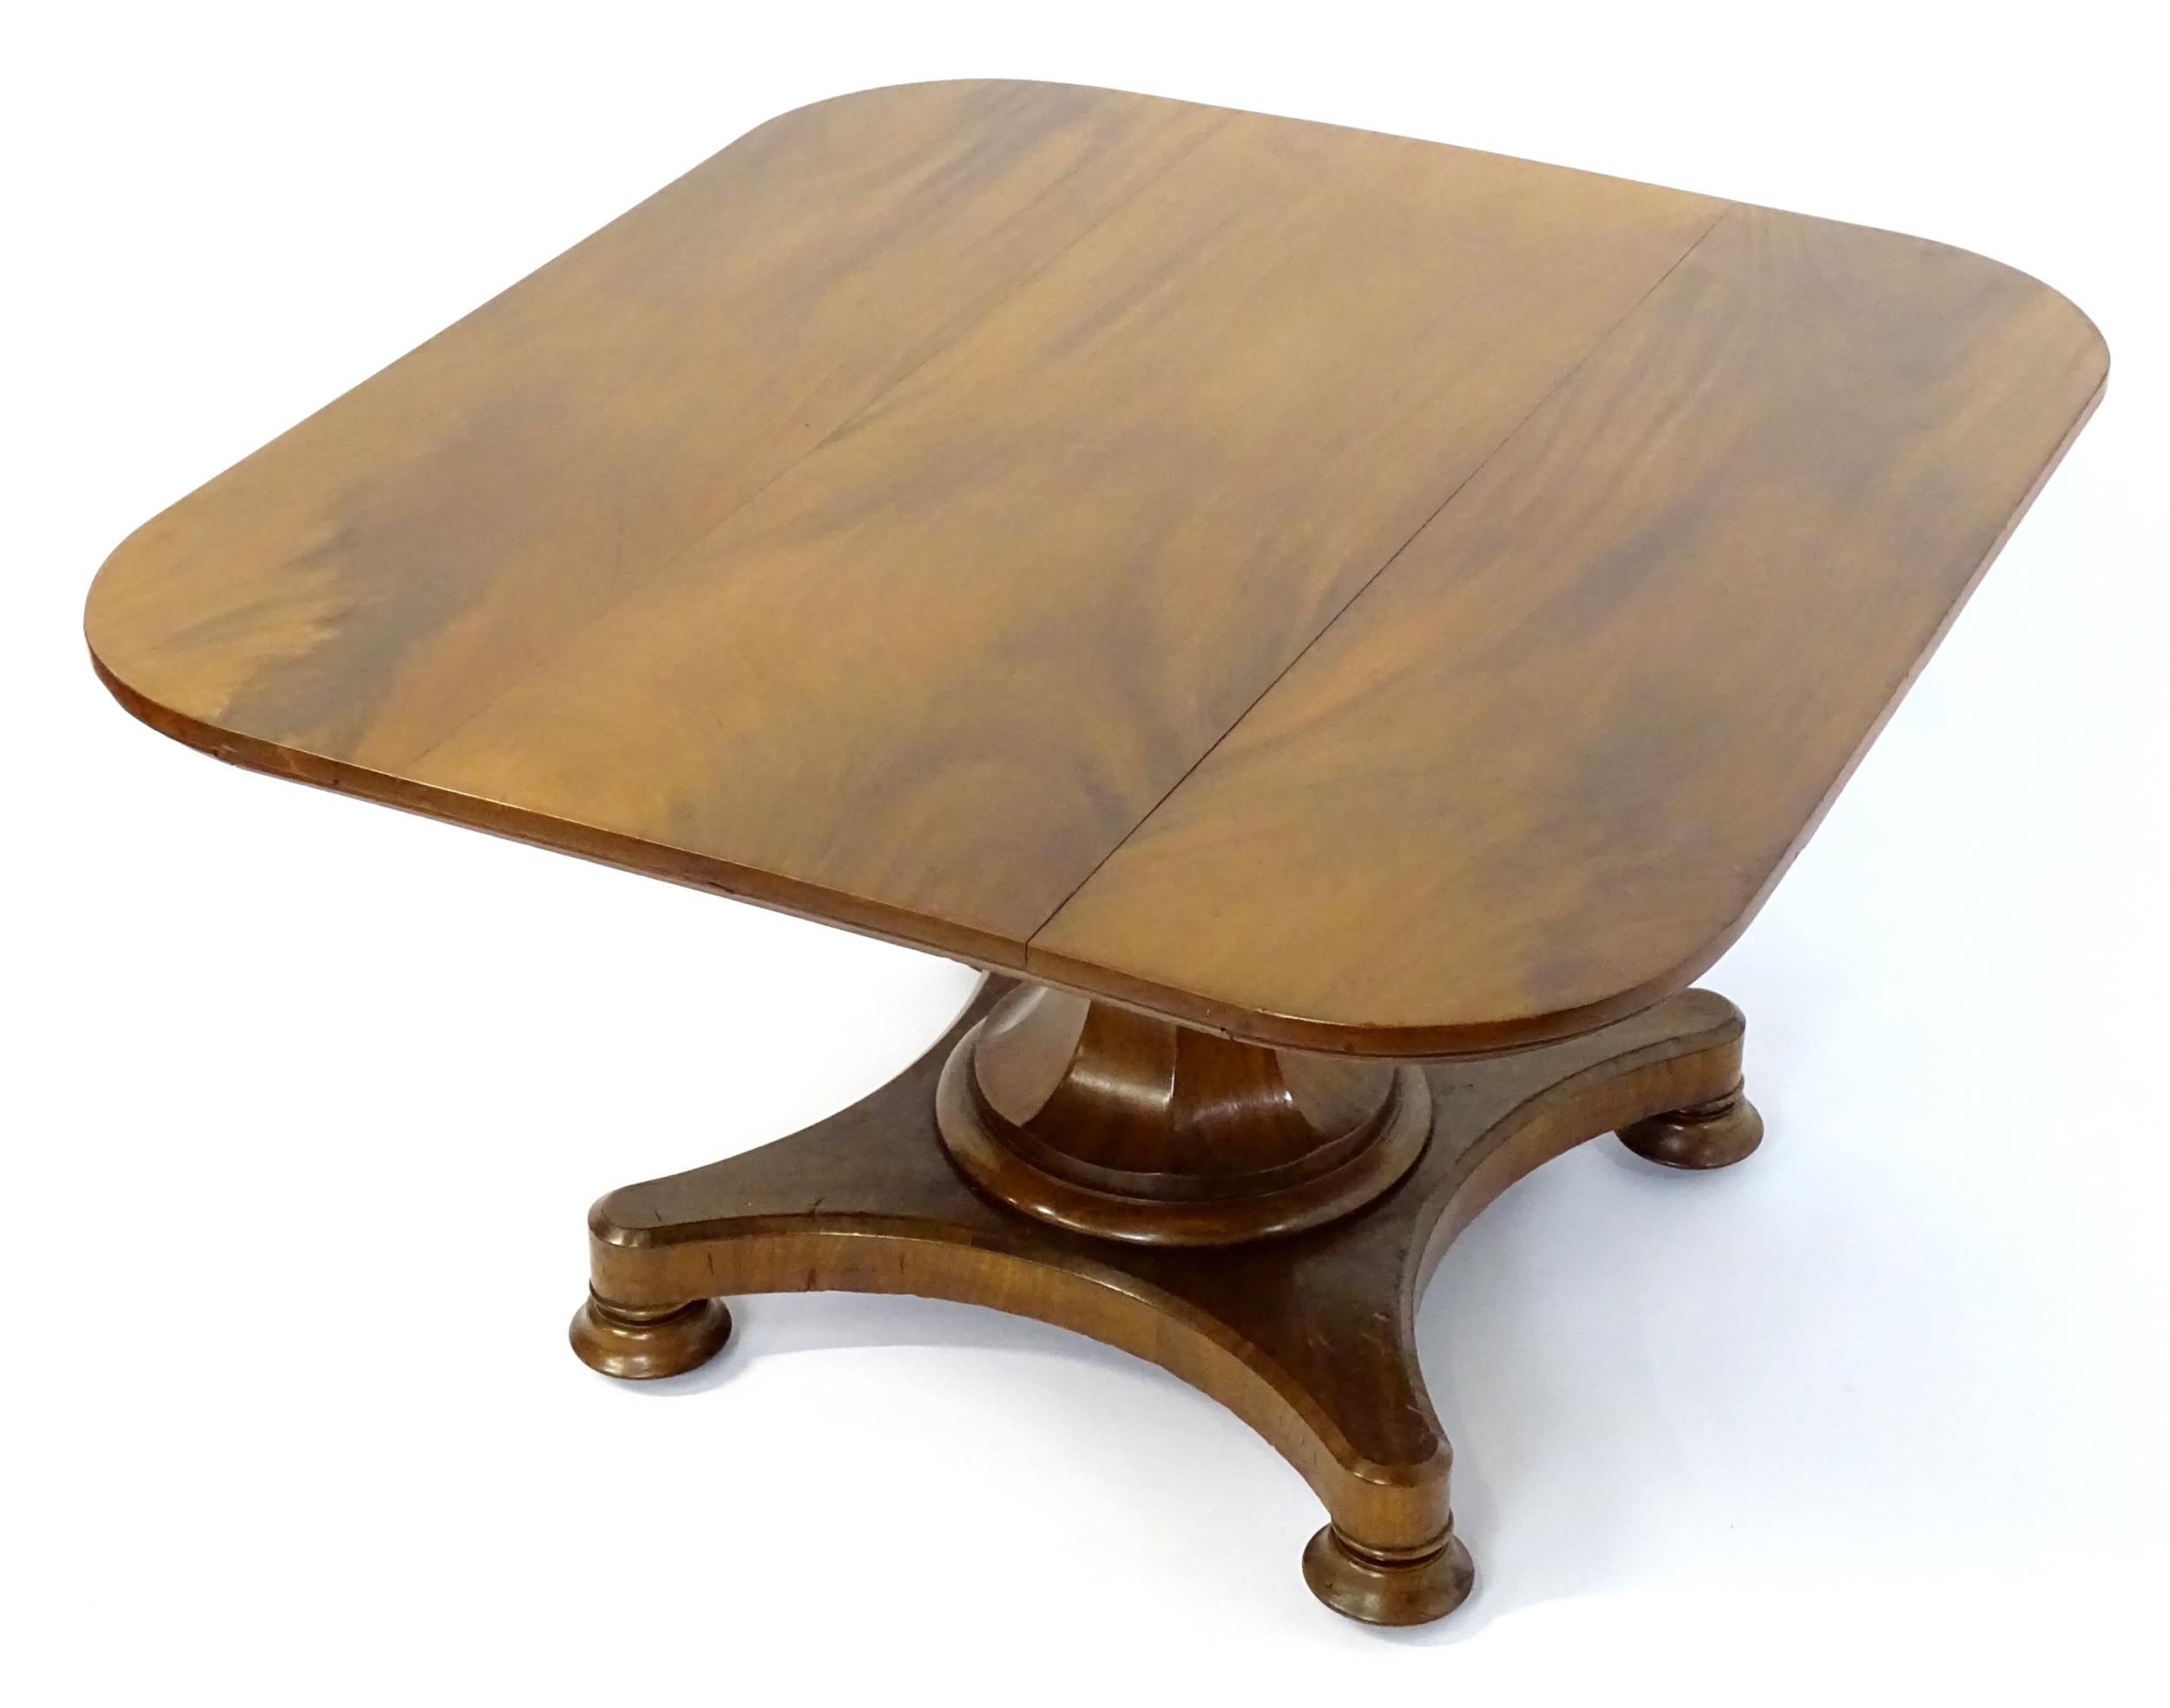 A Victorian mahogany tilt top table with rounded edges and standing on a pedestal base with - Image 7 of 8